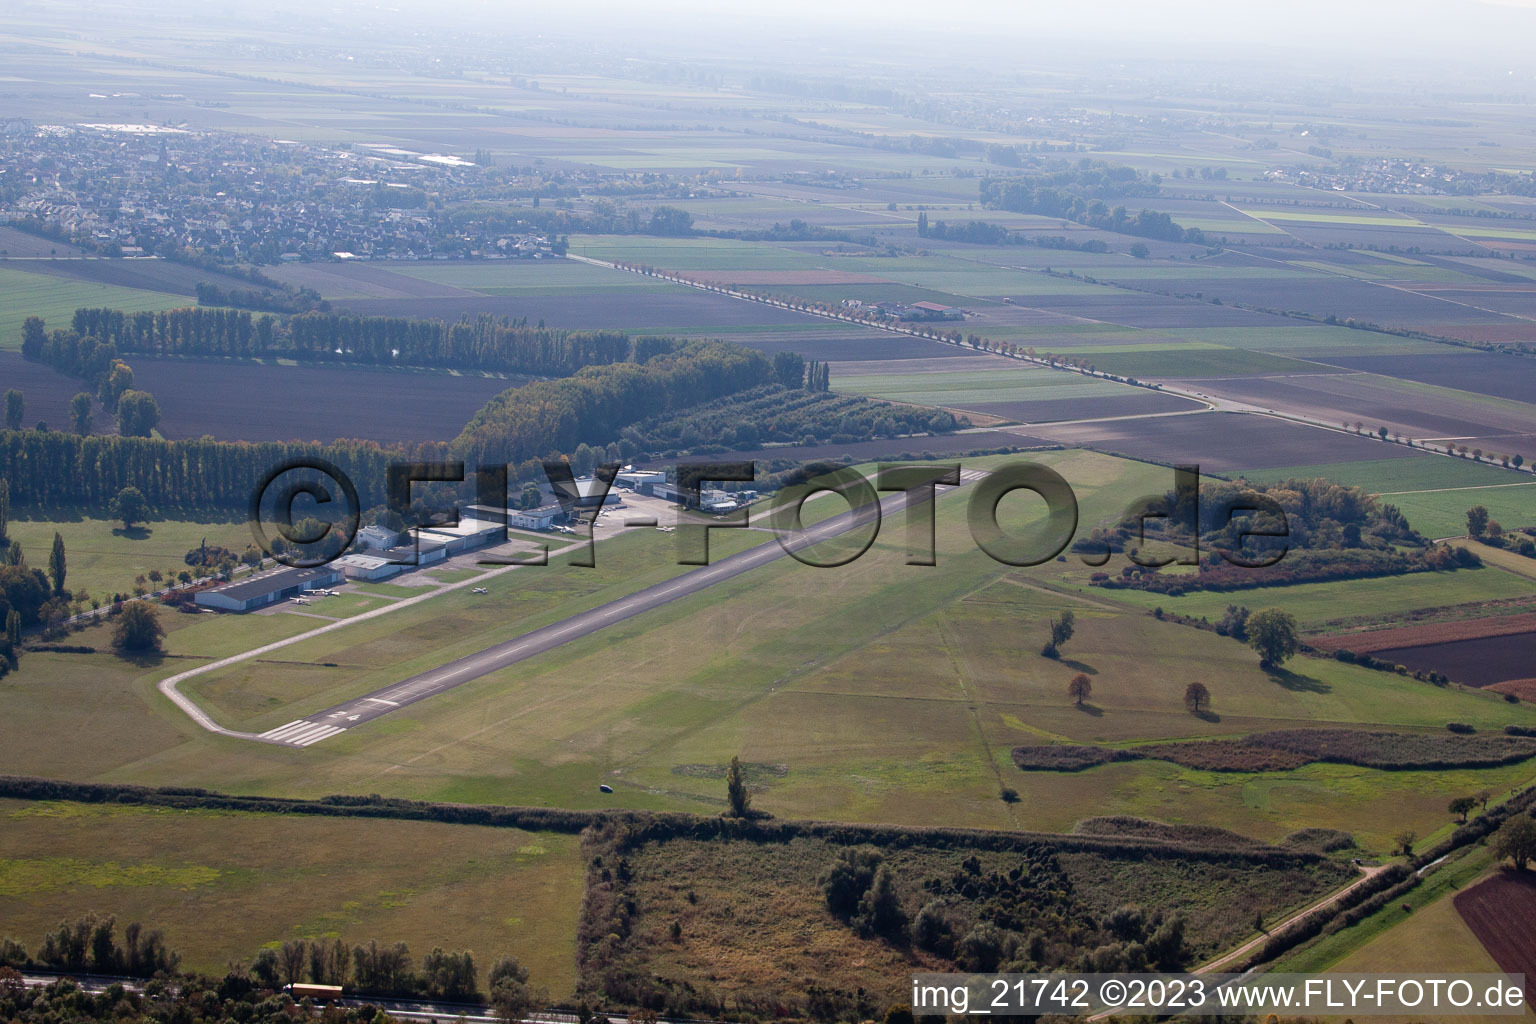 Airfield in Worms in the state Rhineland-Palatinate, Germany